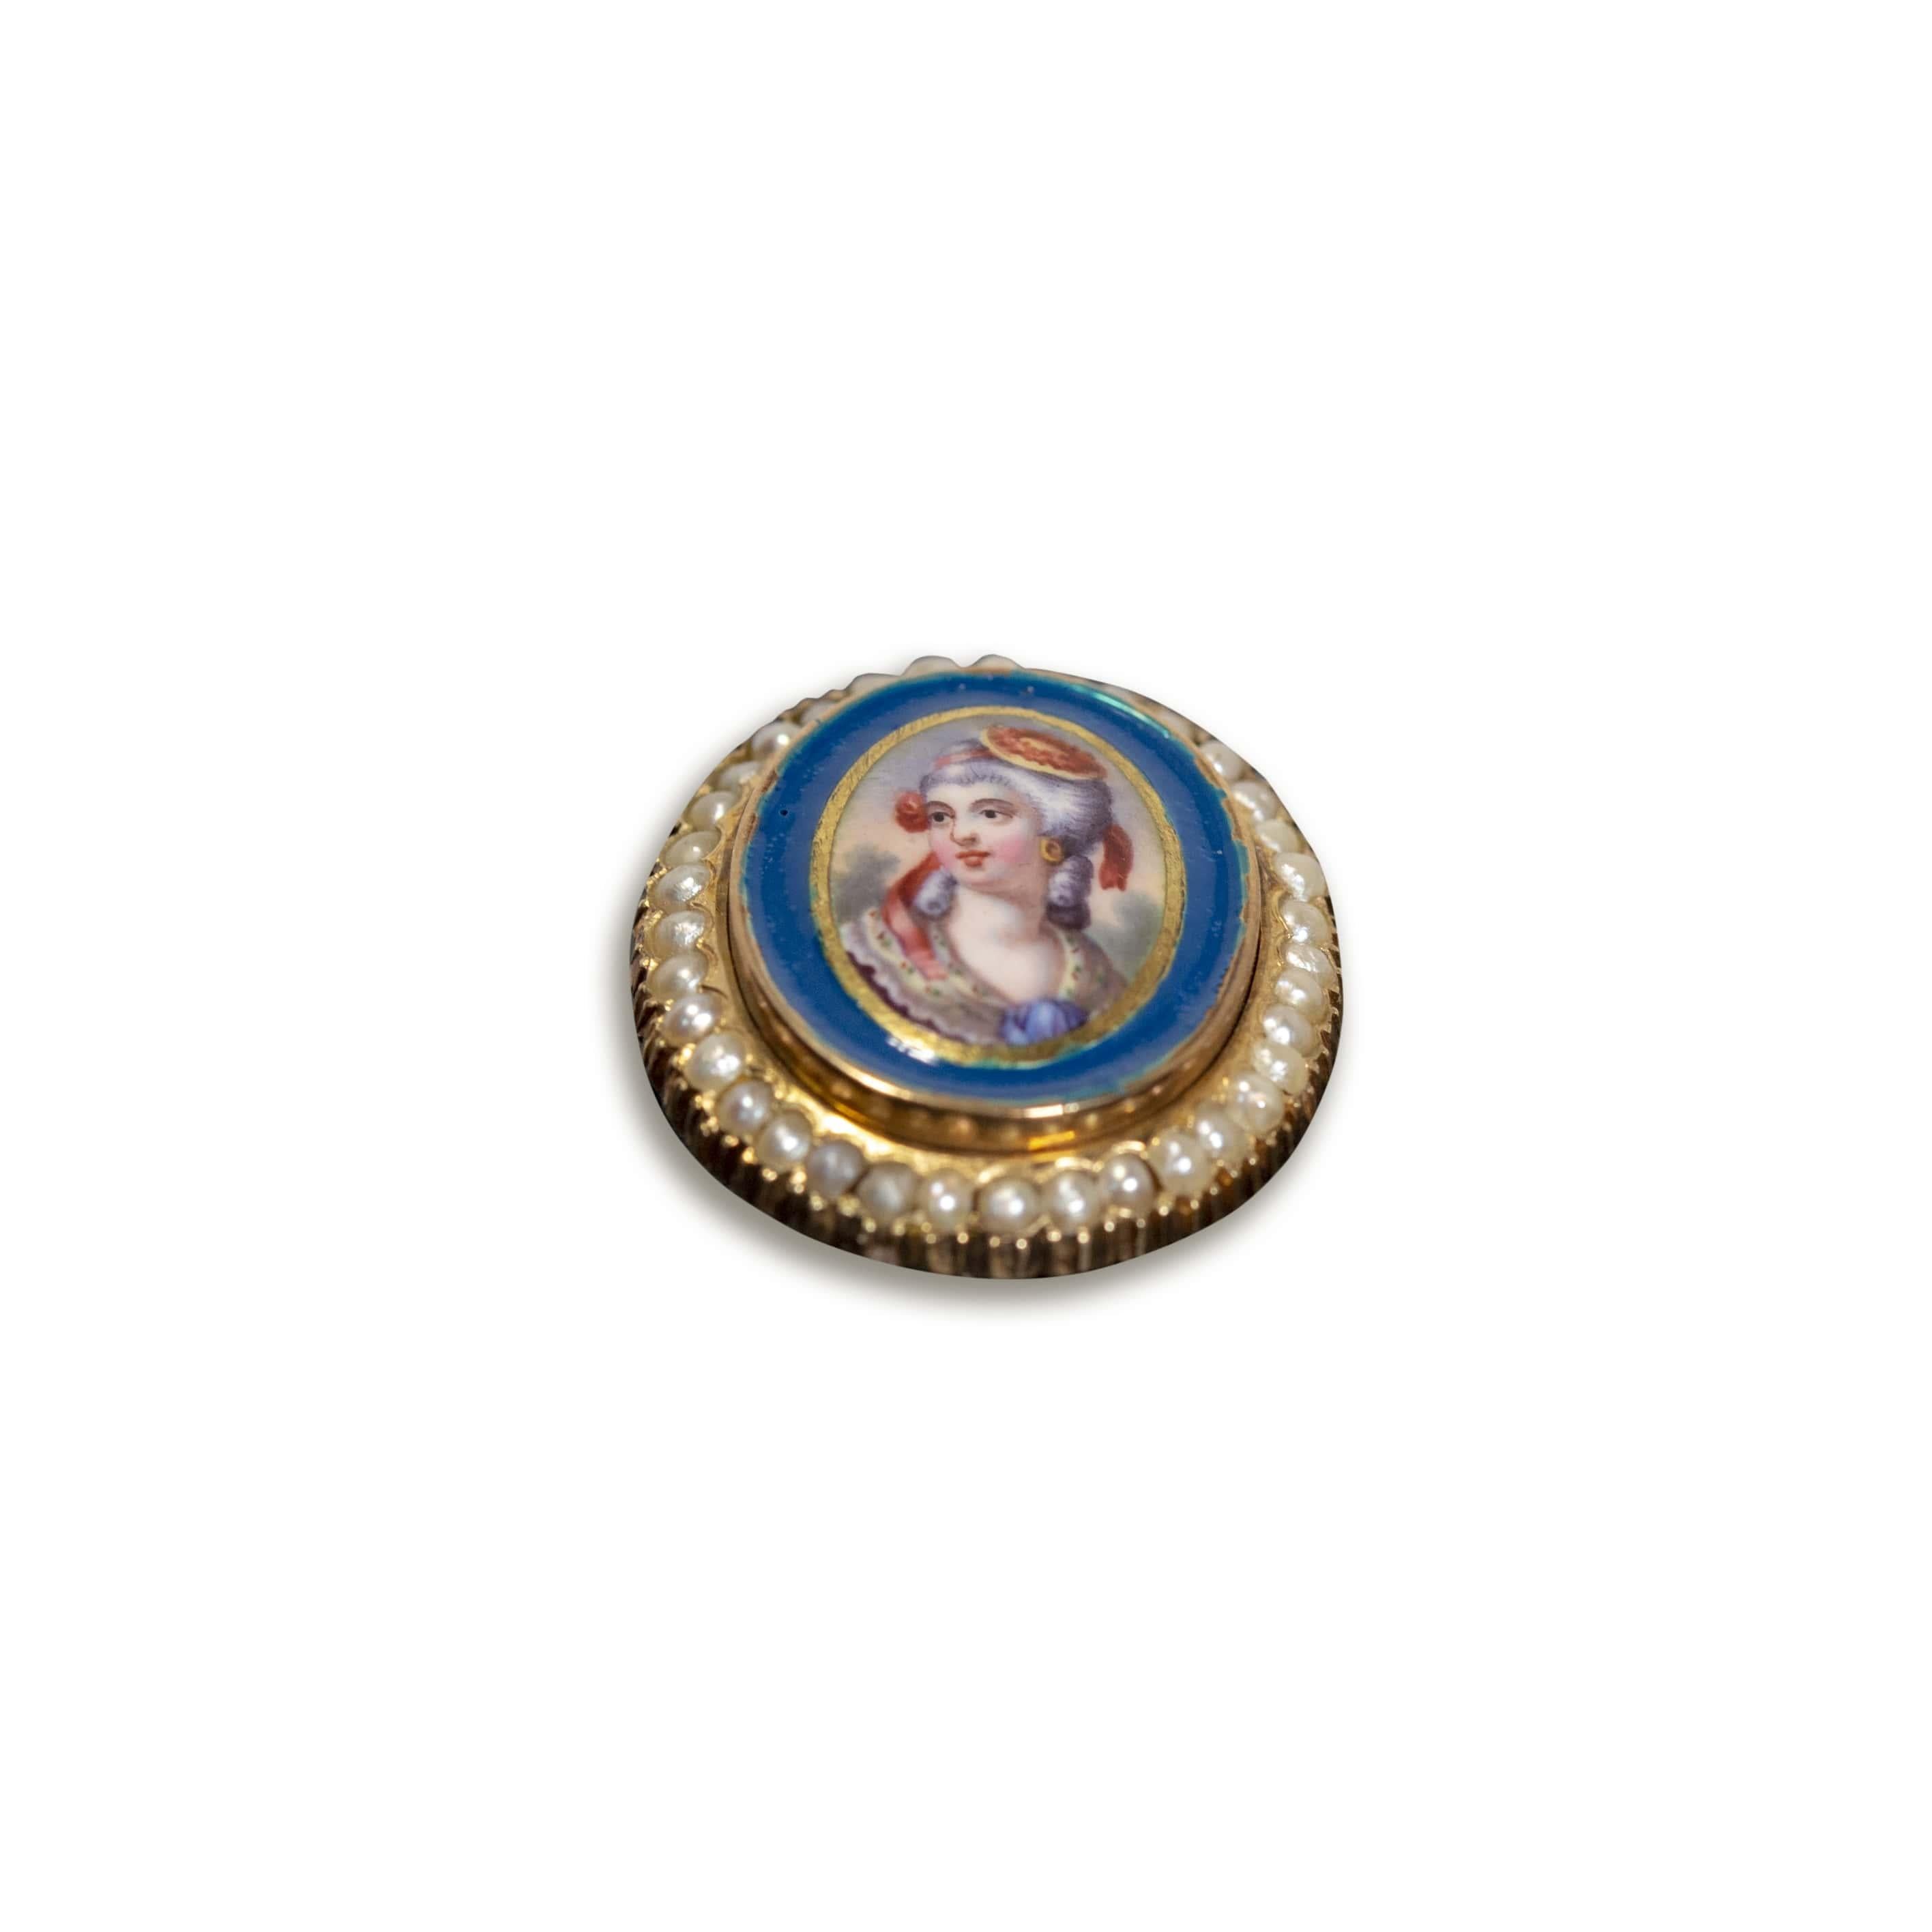 Antique 14k Gold Portrait Brooch Hand Painted Swiss Enamel Porcelain with Natura In Good Condition For Sale In Houston, TX